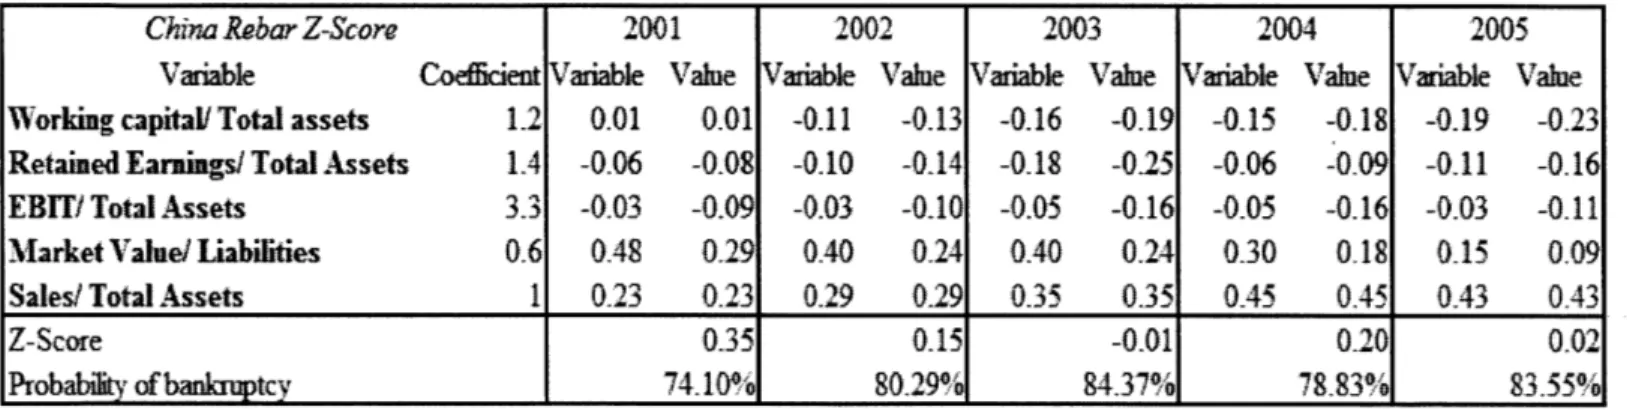 Table  2. China Rebar's  Z-Scores  from 2001  to 2005